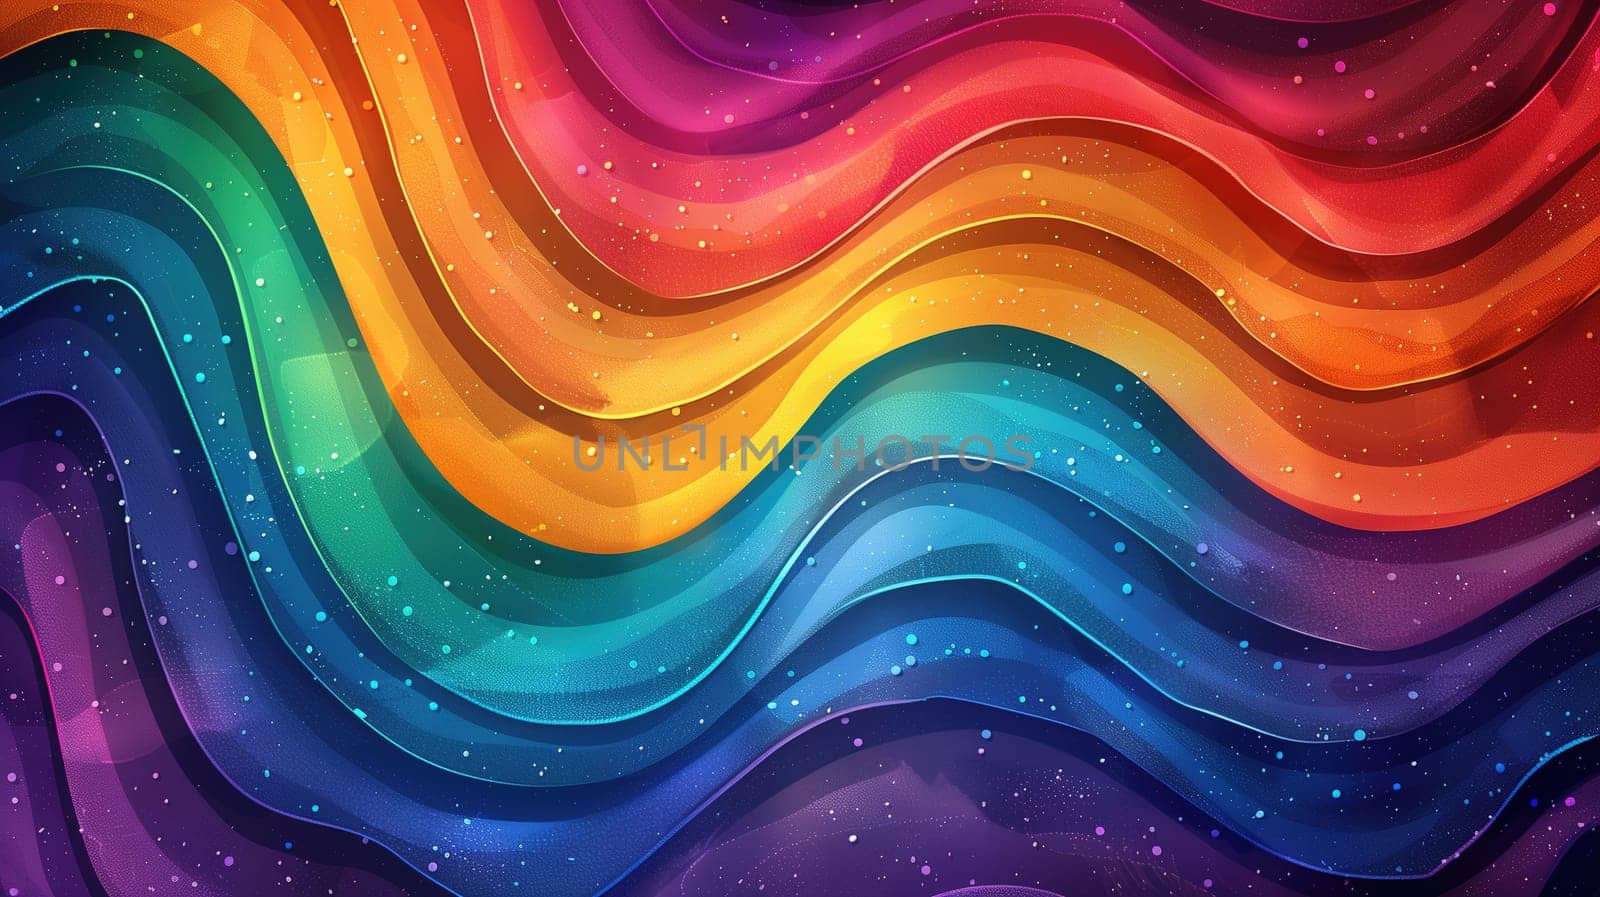 Colorful Background With Wavy Lines and Stars by TRMK